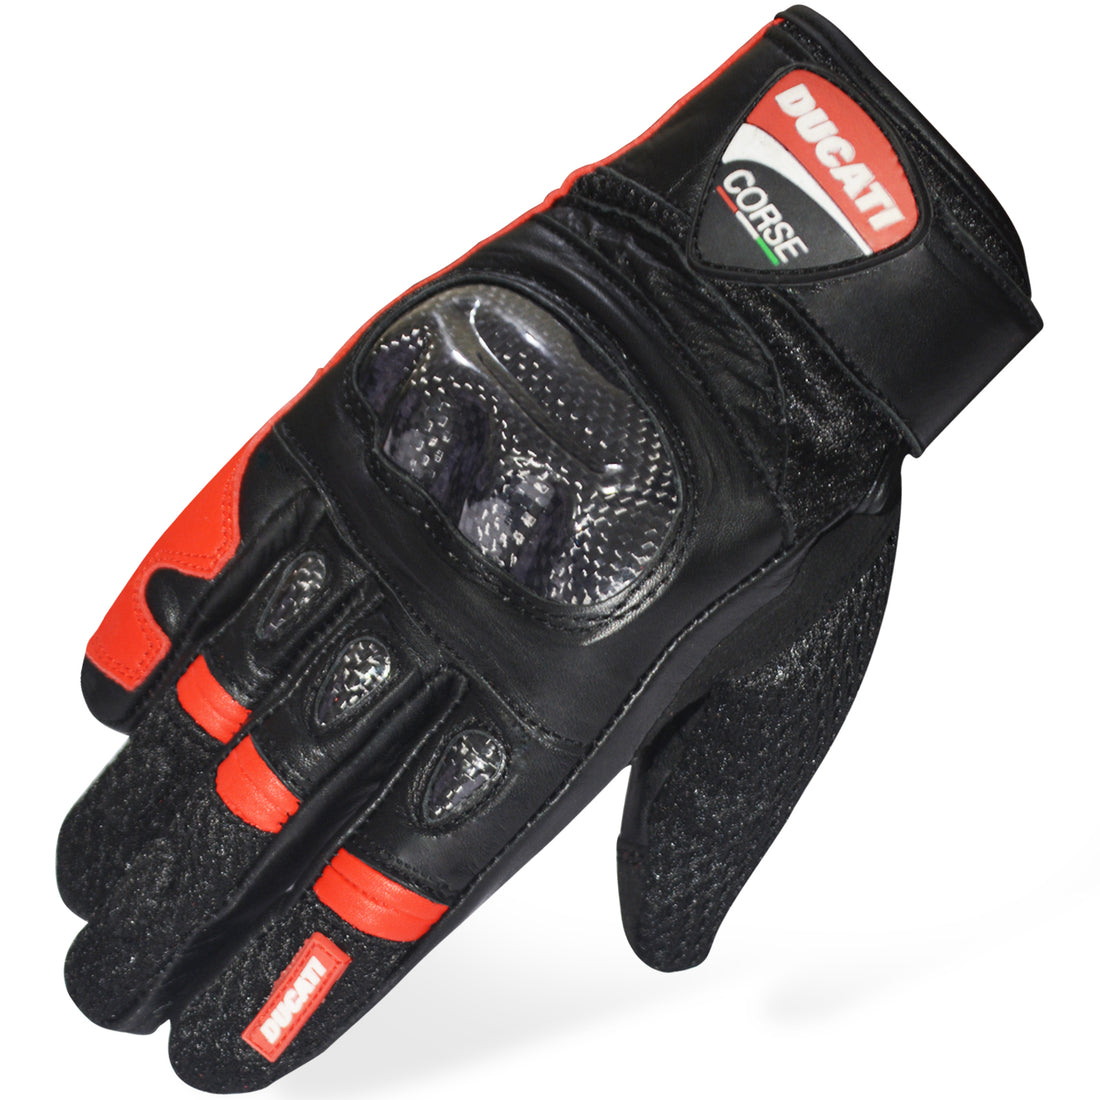 Ducati Corse New Leather Racing Motorbike Glove Pre-Curved Finger Motorcycle Gloves (Black Red)